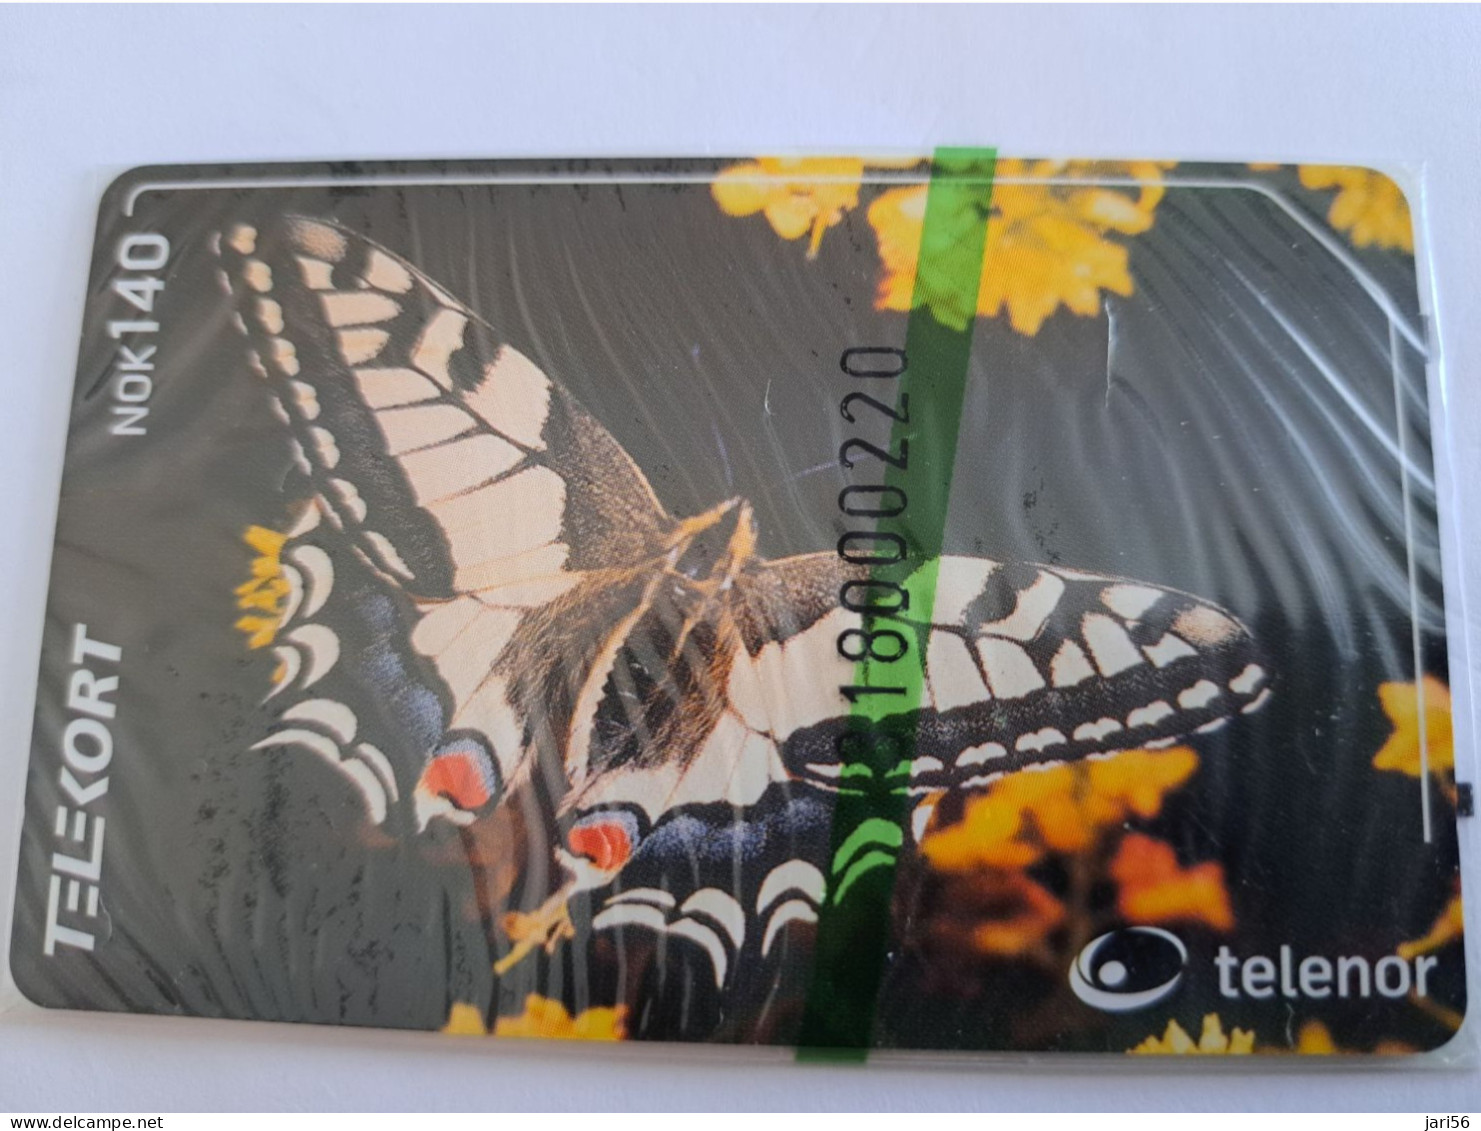 NORWAY / CHIPCARD/  TELENOR / 140 NOK  /  BUTTERFLY/ PAPPILLION/  / TIRAGE 7000 /    N-211  MINT IN WRAPPER **14521** - Norway